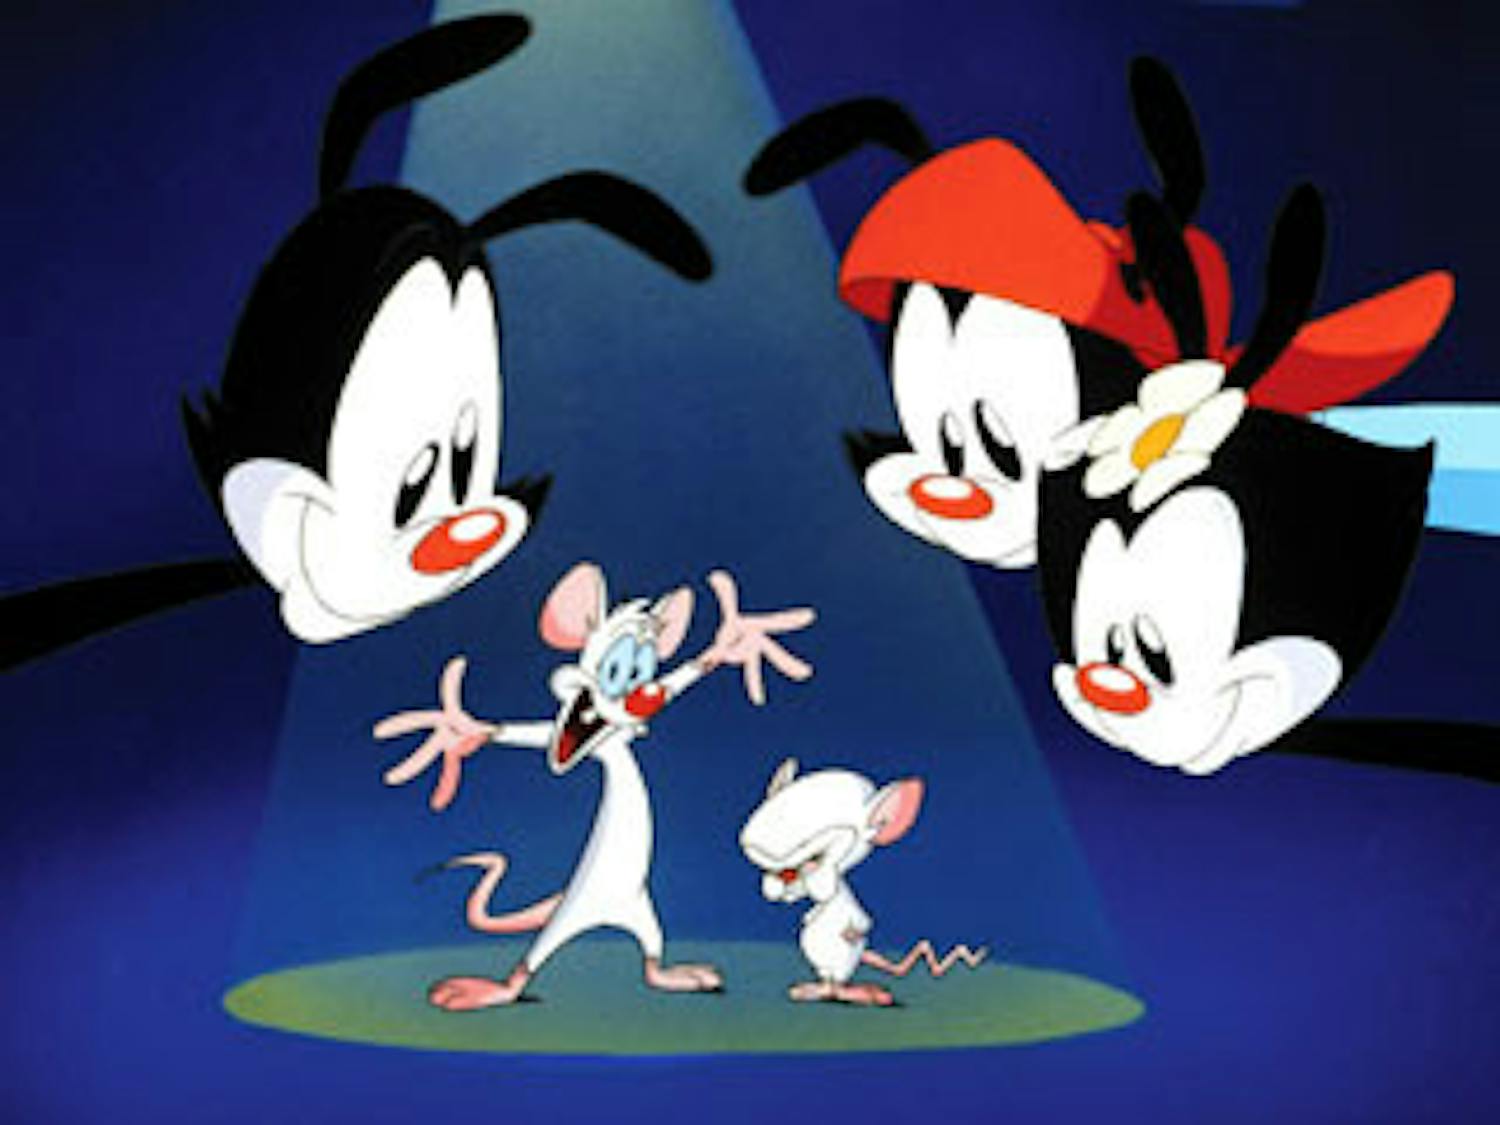 From 1995 to 1998, these crazy, lovable critters starred on Kids’ WB! Both “Animaniacs” and “Pinky and the Brain” are available on DVD.